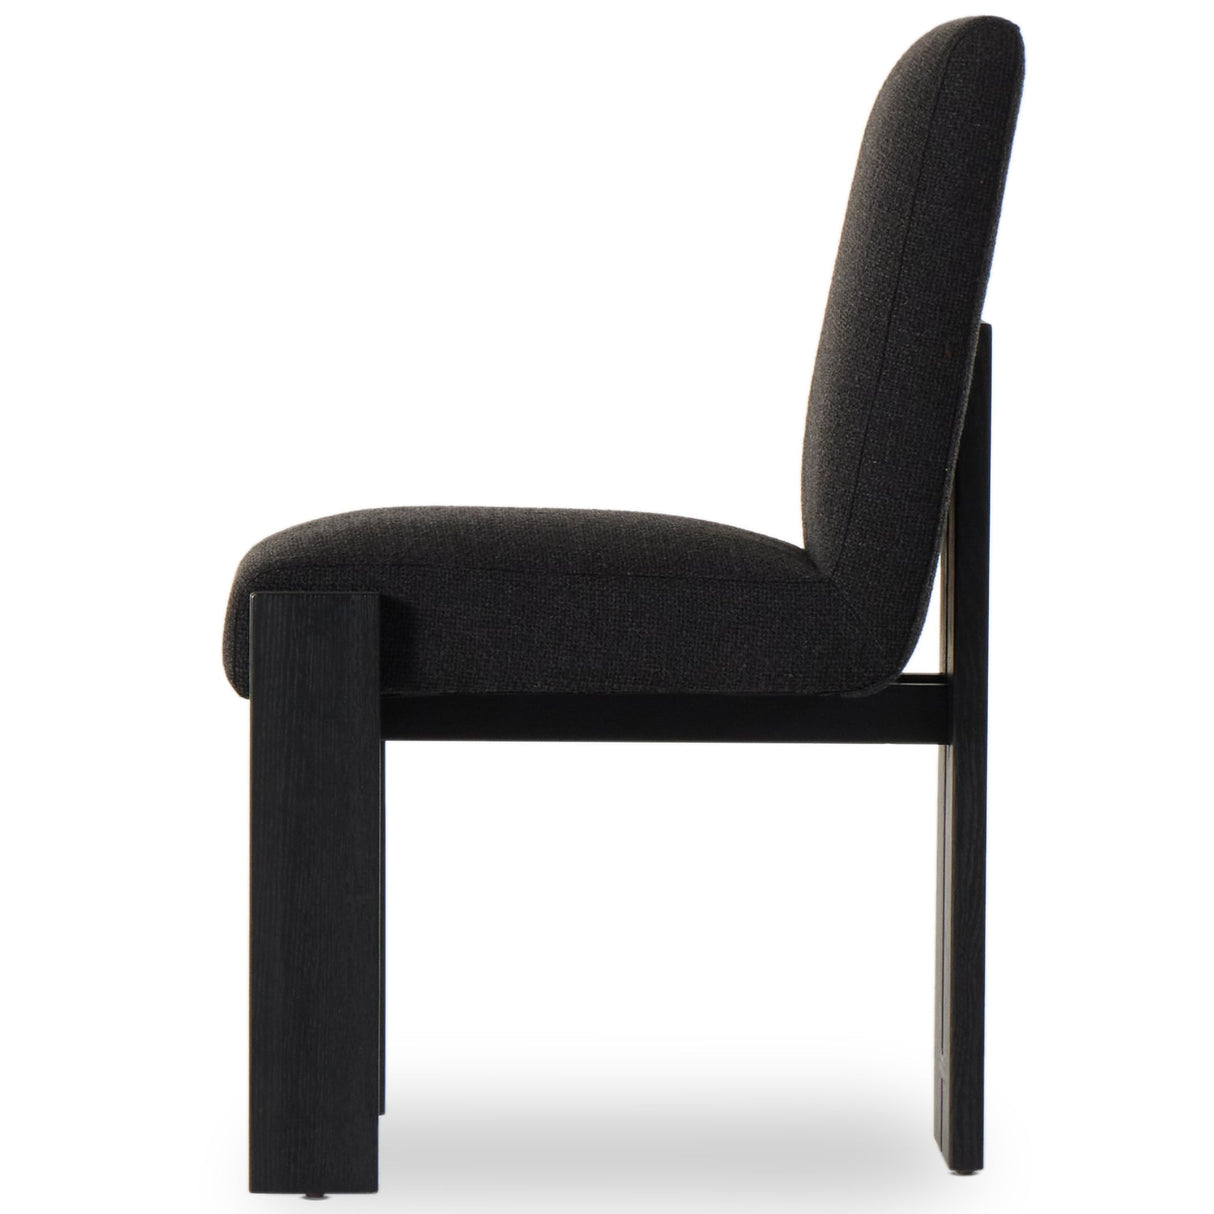 Four Hands Roxy Dining Chair Upholstered Dining Chair